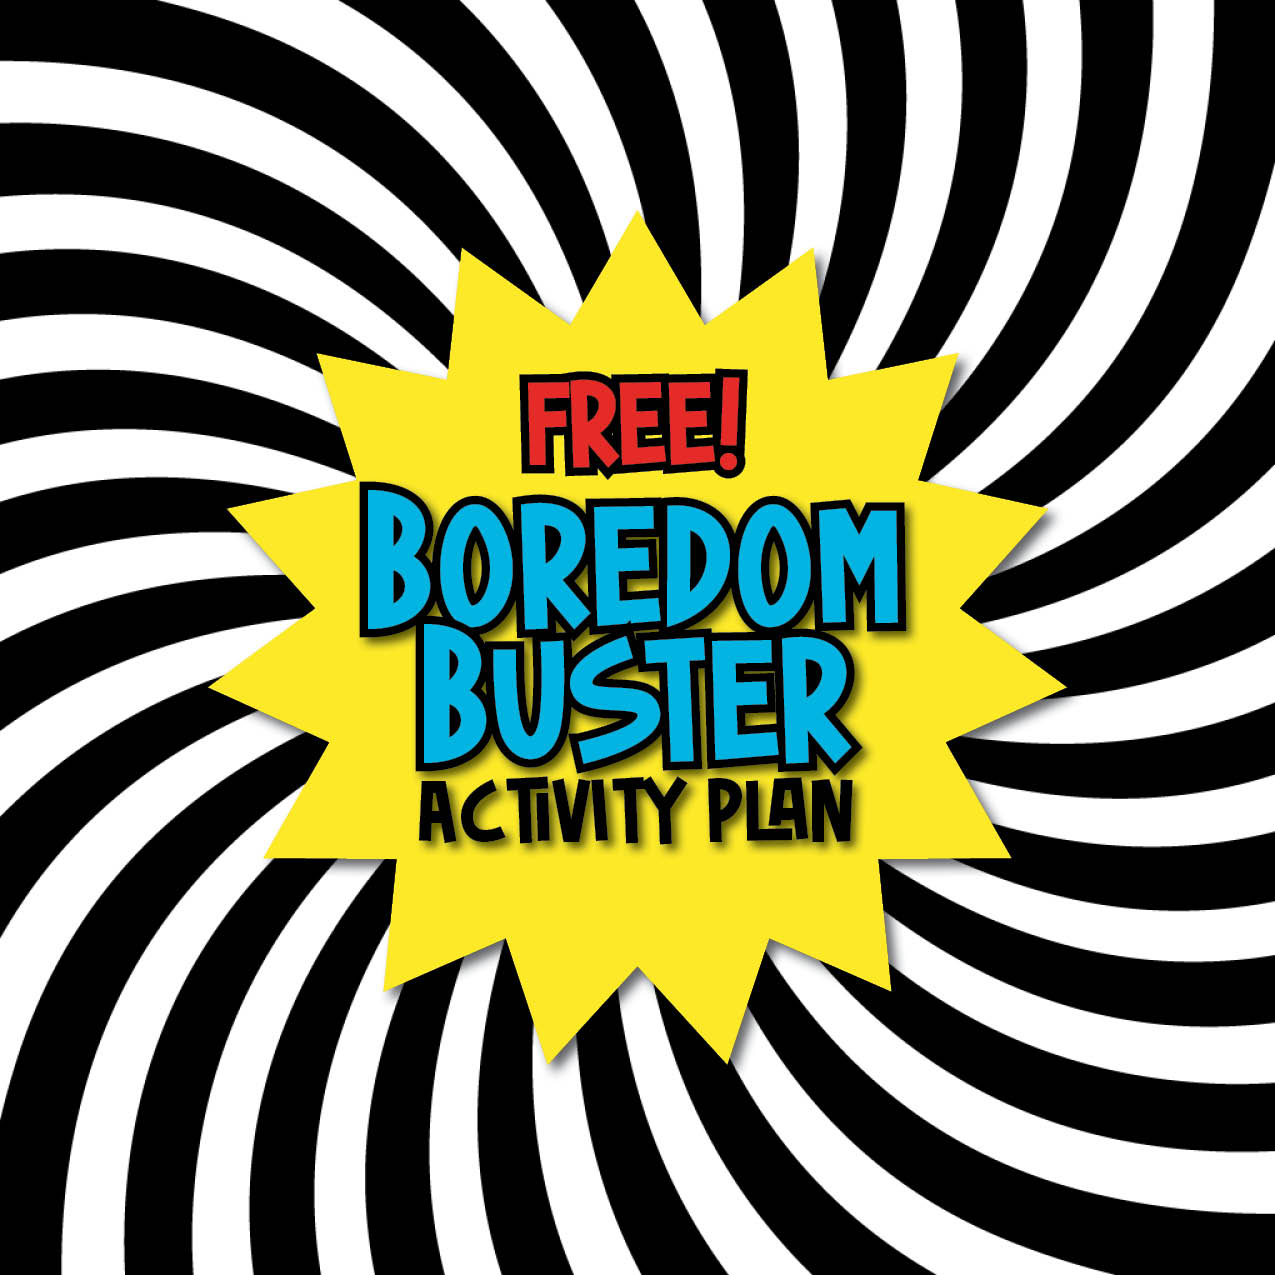 Free Boredom Buster Activity Plan for Kids filled with science, technology, engineering, art, and math